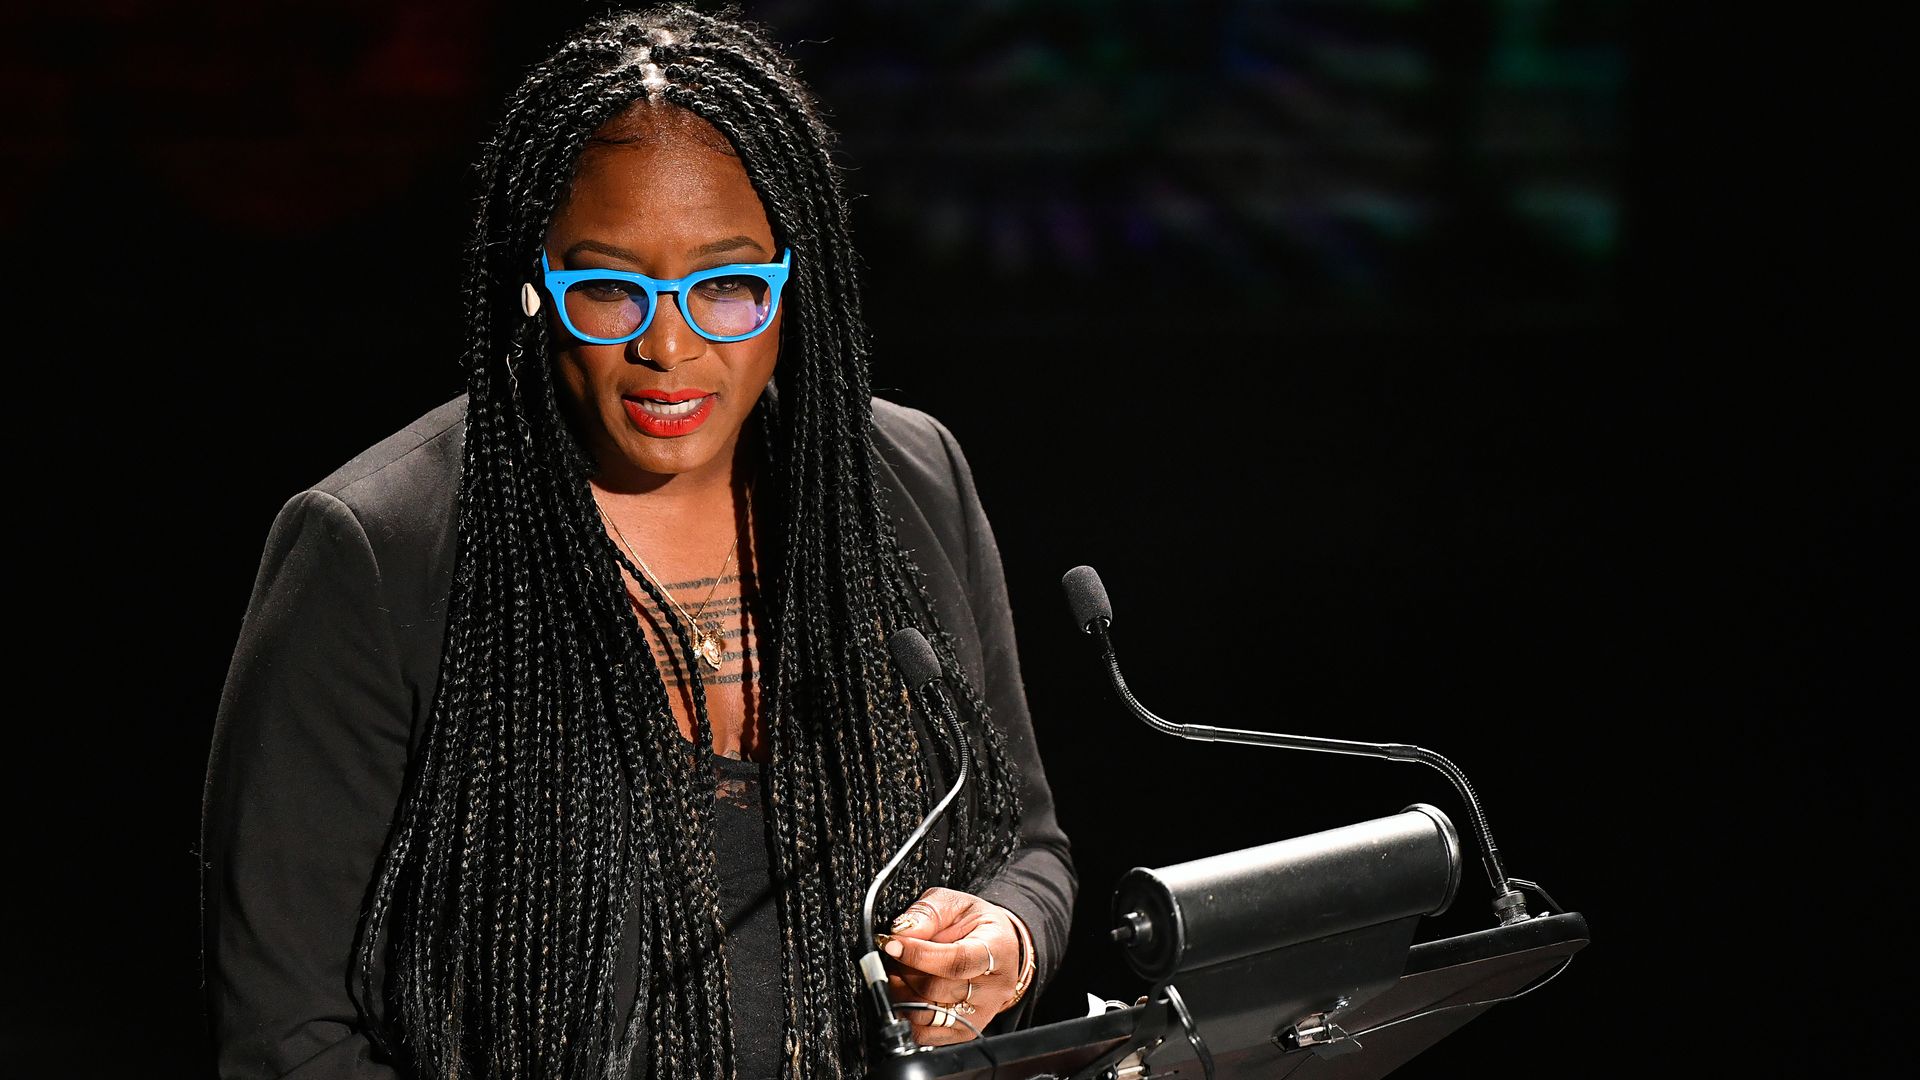 Alicia Garza speaking onstage in New York City in February.